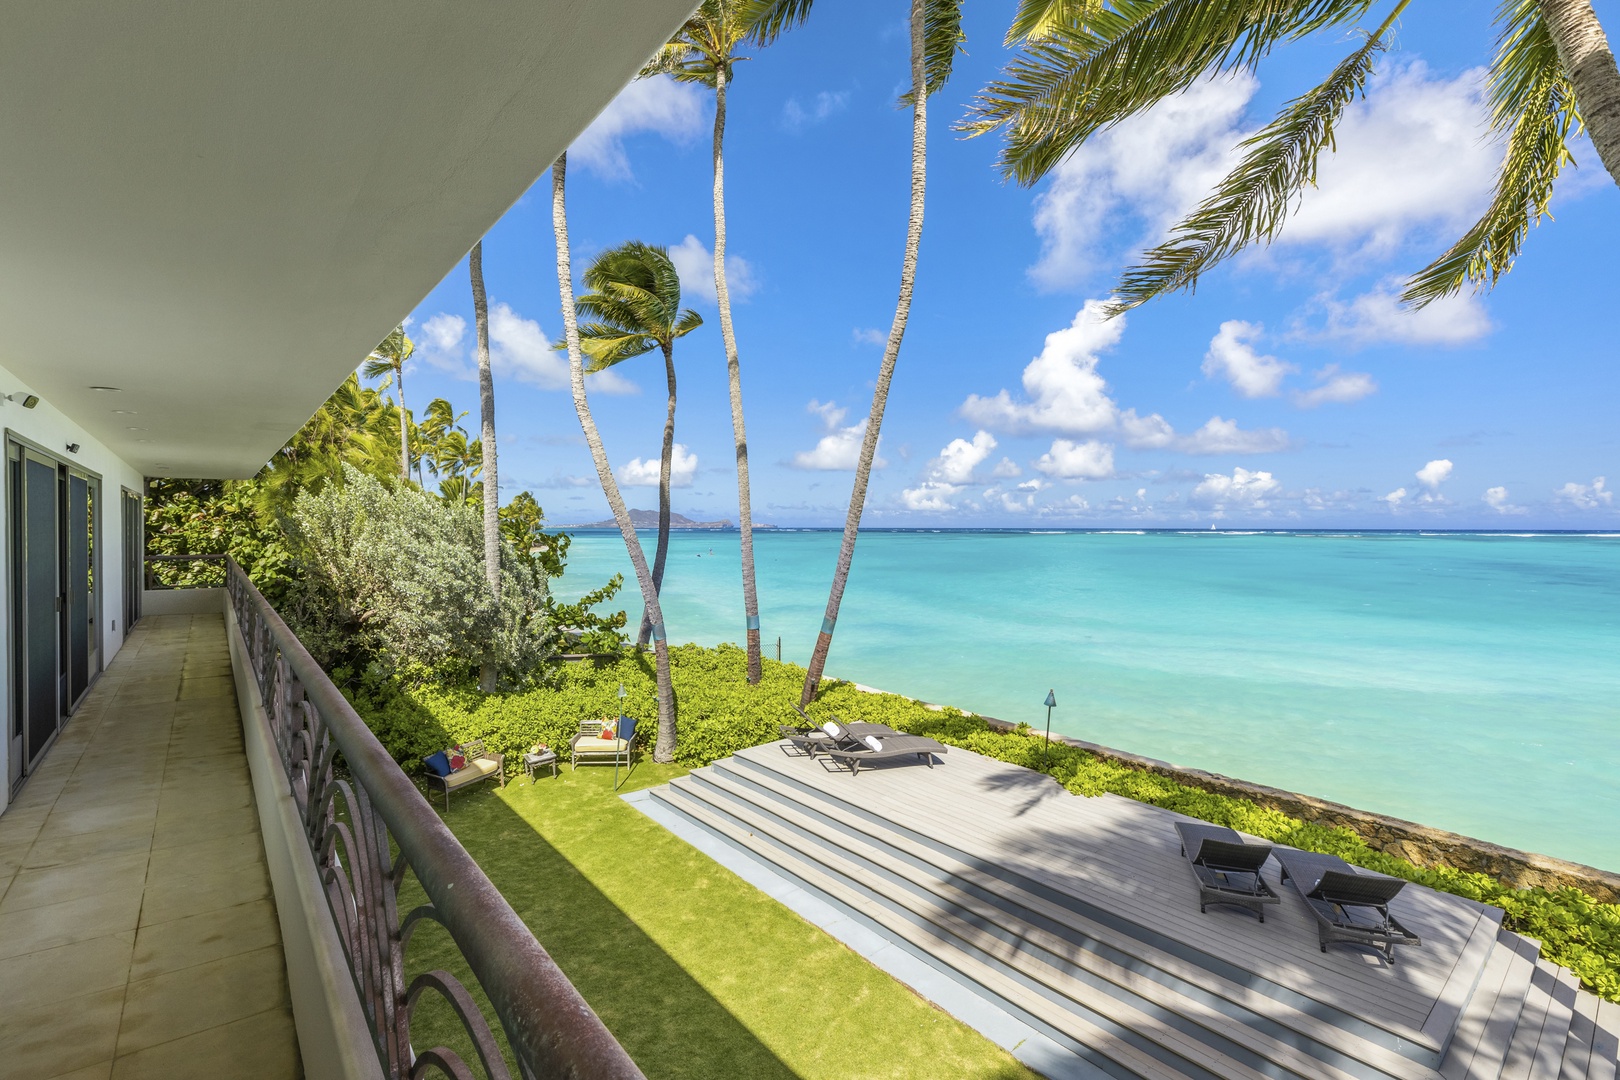 Kailua Vacation Rentals, Mokulua Sunrise - Just feet away, the dazzling turquoise waters and gentle lapping waves of Lanikai Beach will make you feel like you’ve stumbled upon your own private isle!